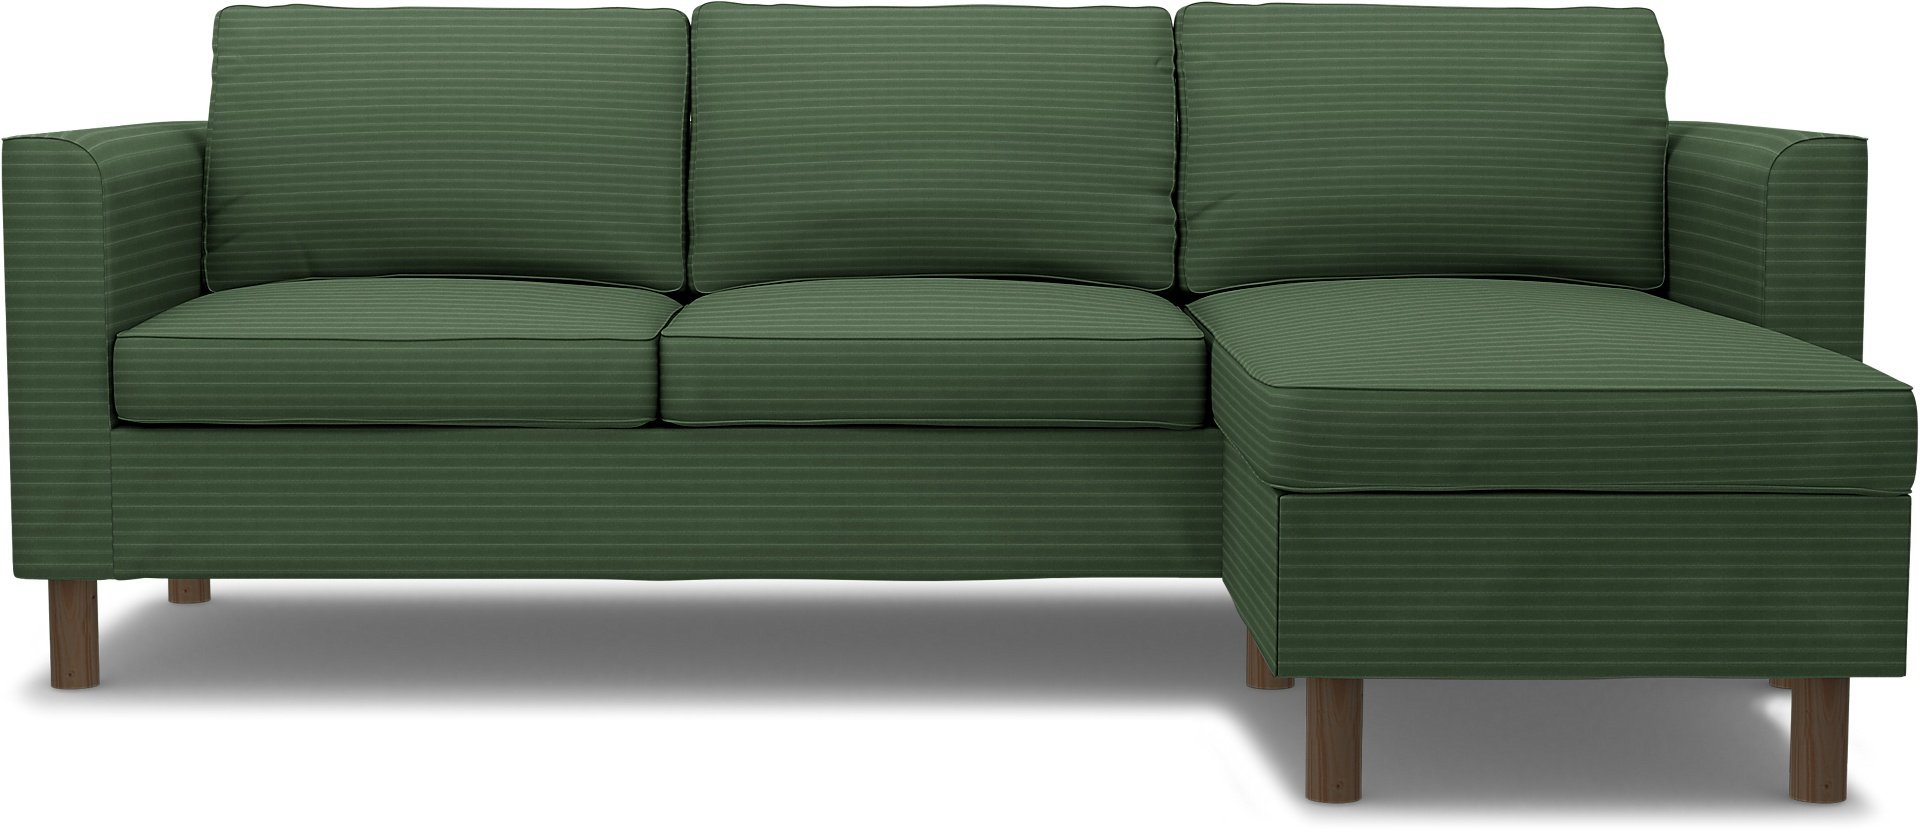 IKEA - Parup 3 Seater with chaise longue, Palm Green, Corduroy - Bemz